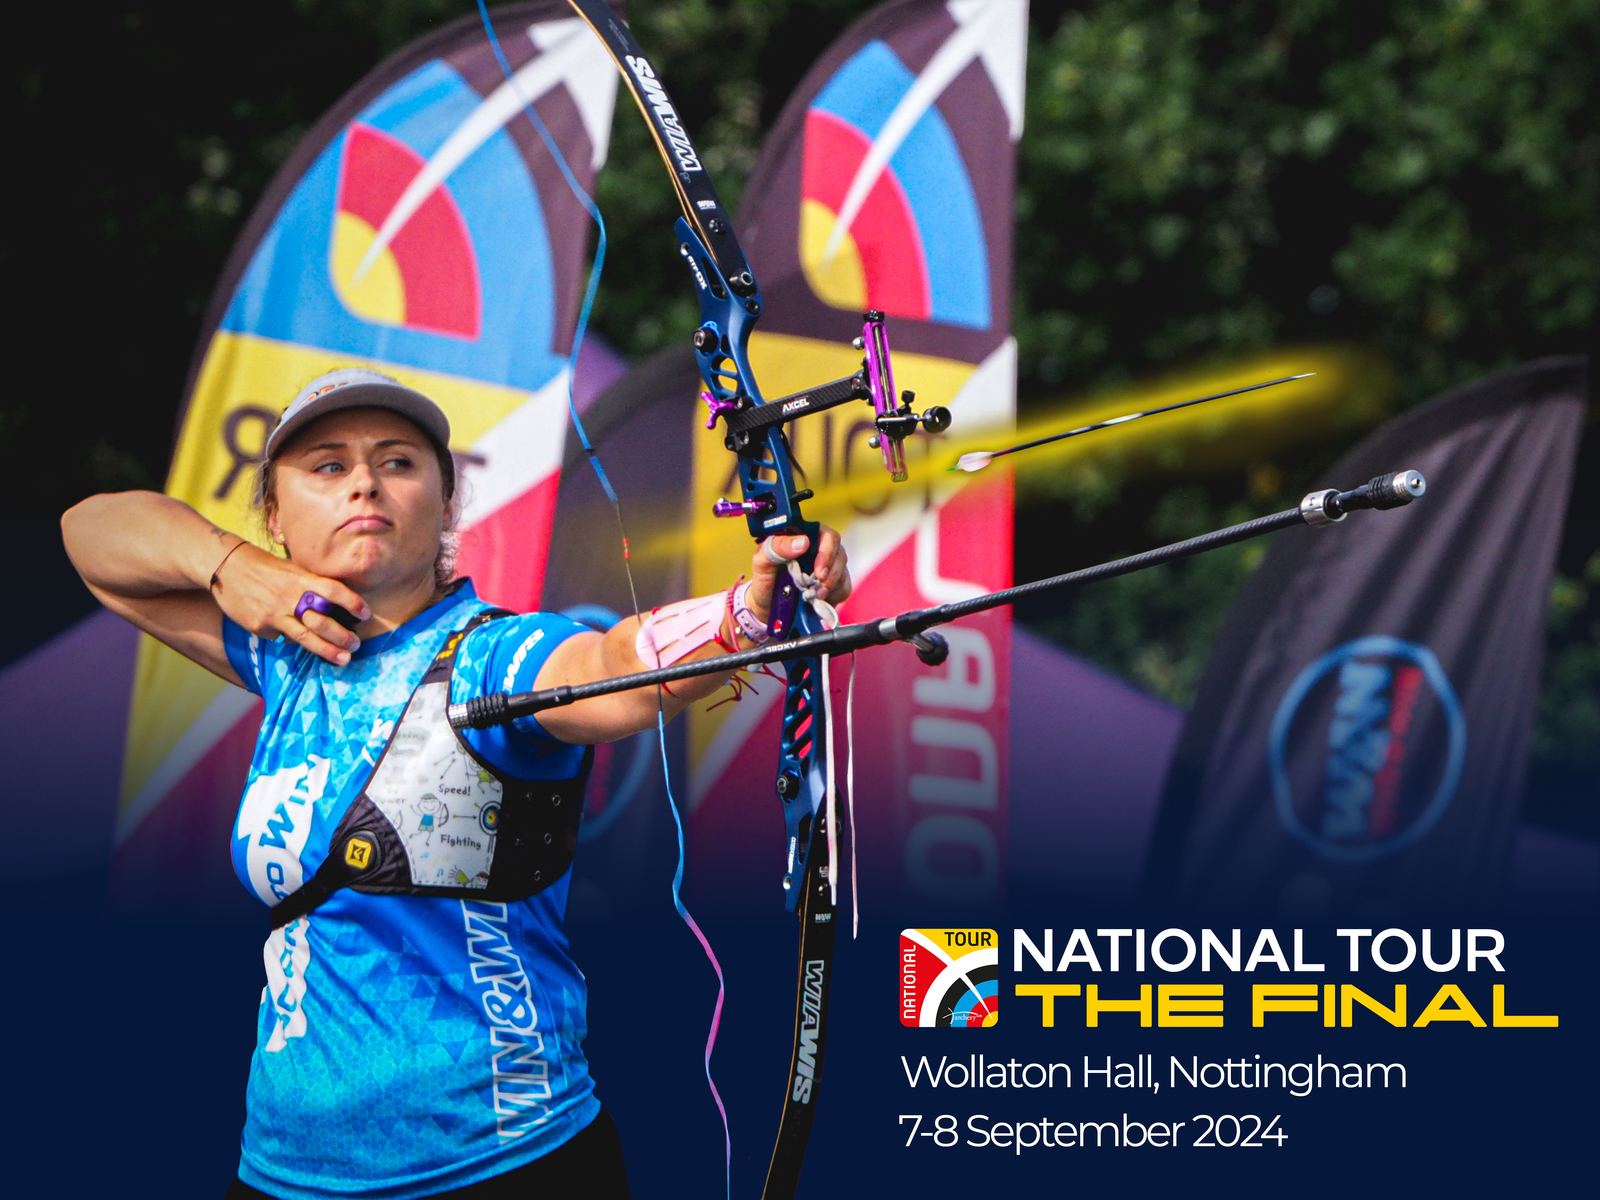 Archery GB National Tour: The Final 2023